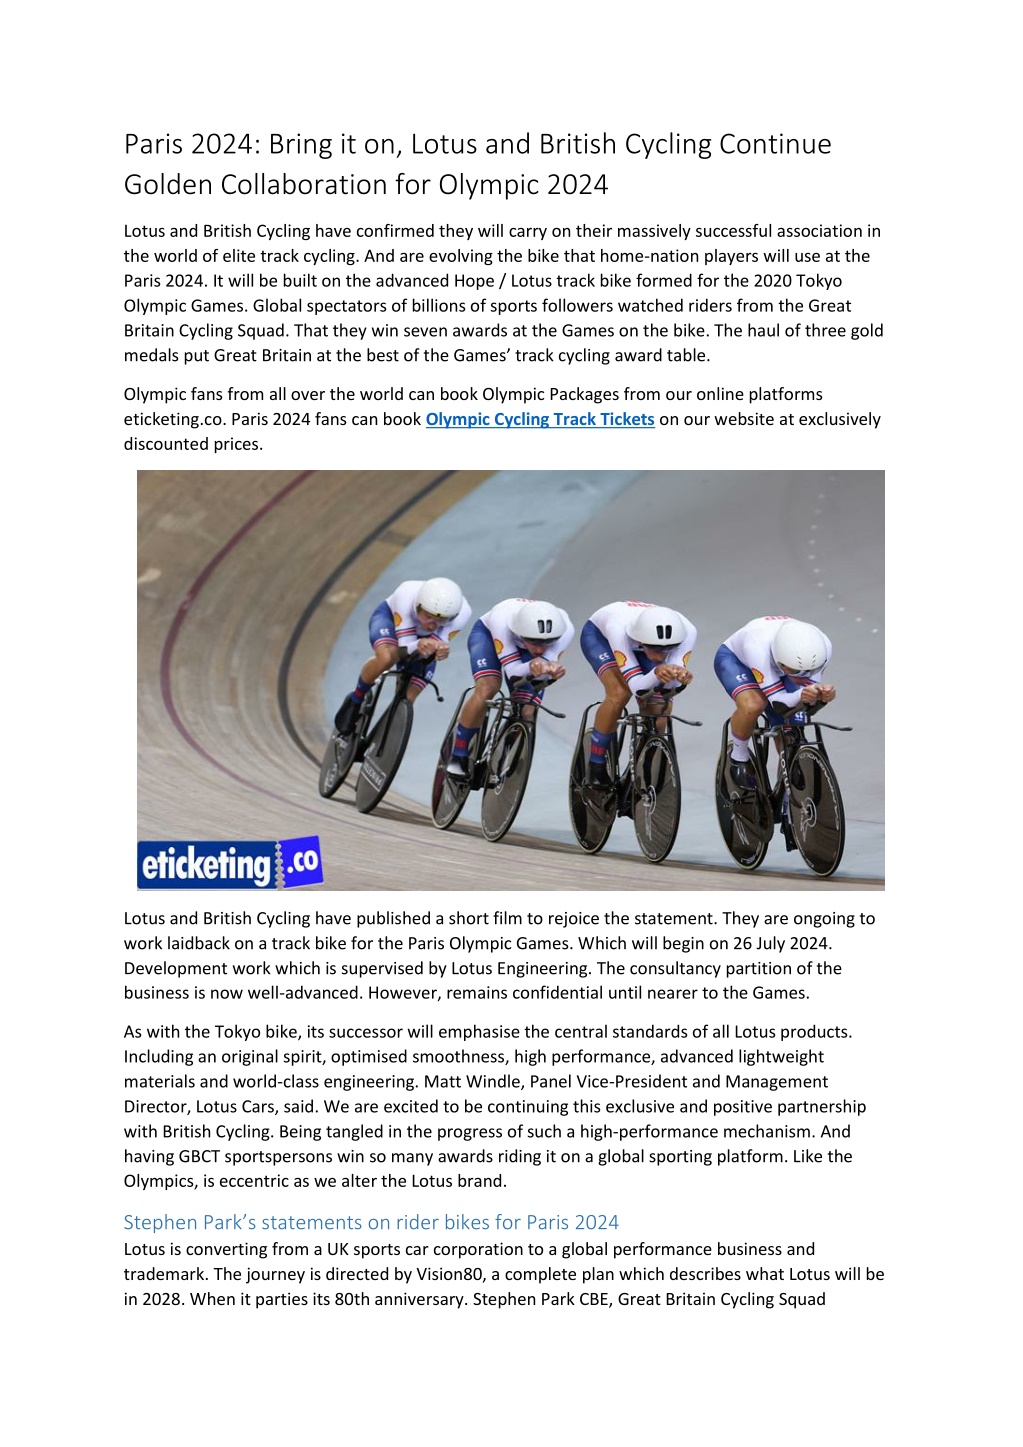 PPT Paris 2024 Bring it on, Lotus and British Cycling Continue Golden